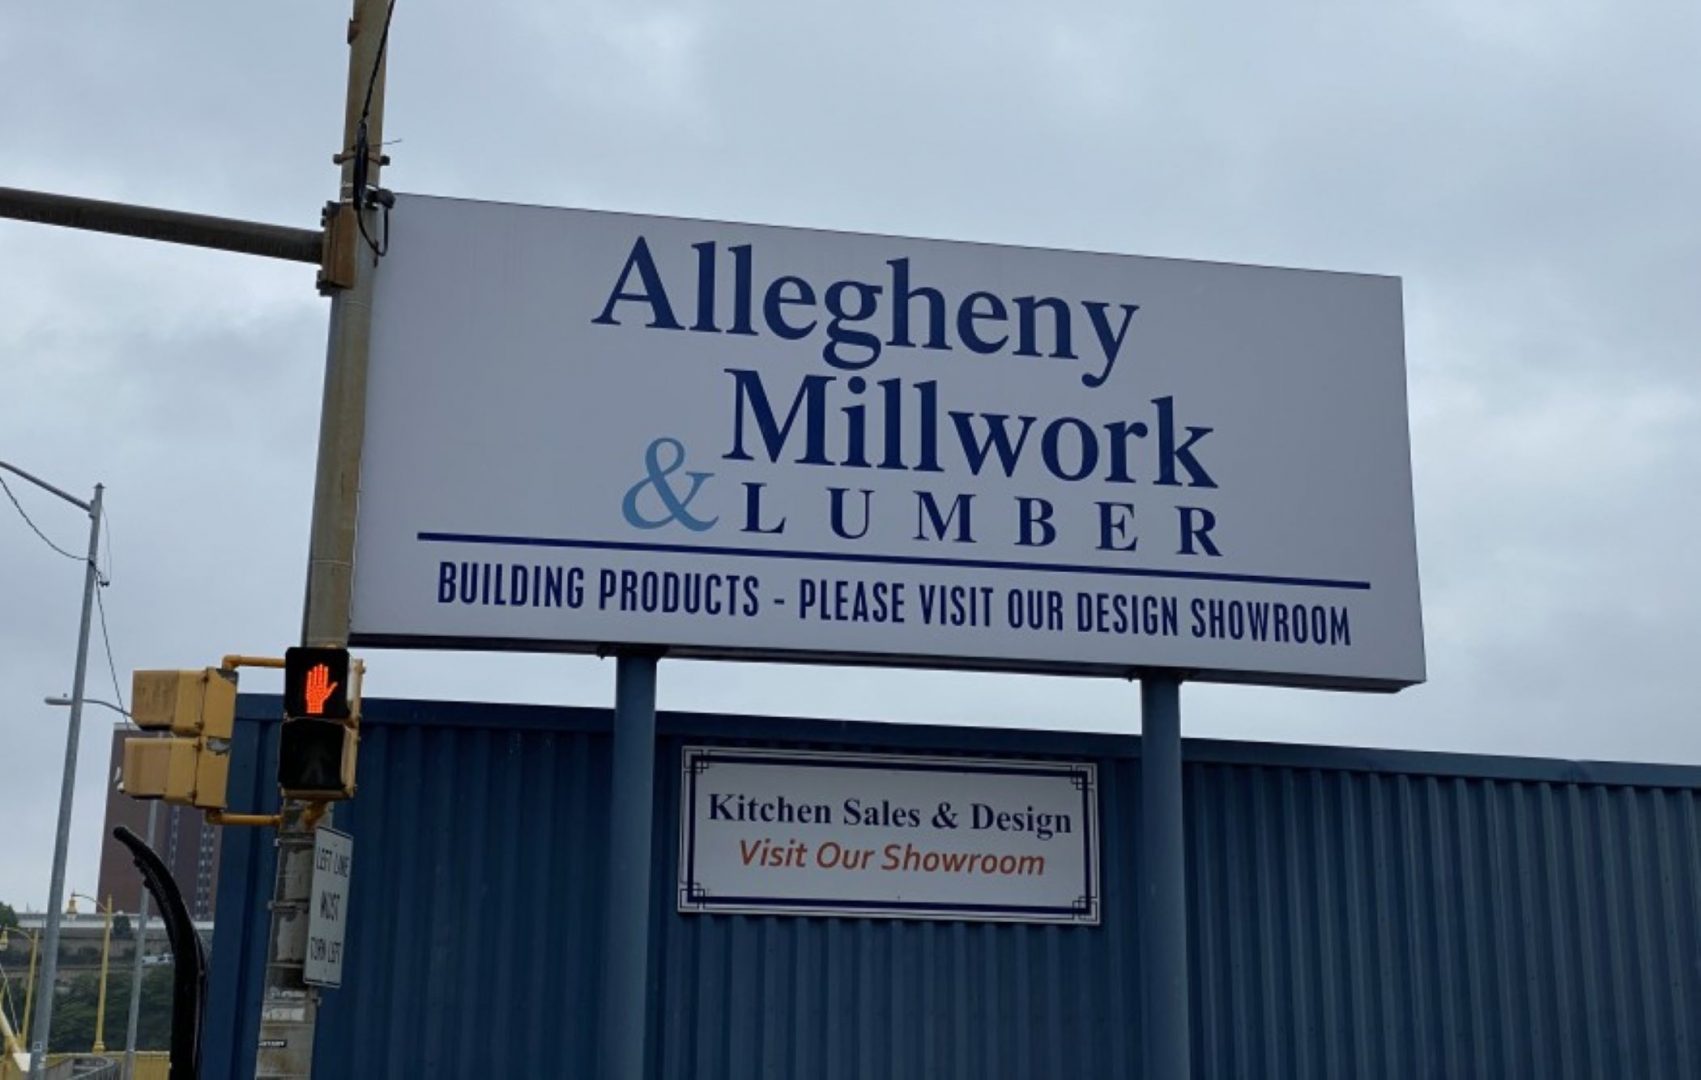 Allegheny Millwork & Lumber says its lumber prices have risen four-fold since May 2020, thanks to supply shortages amid the coronavirus pandemic.